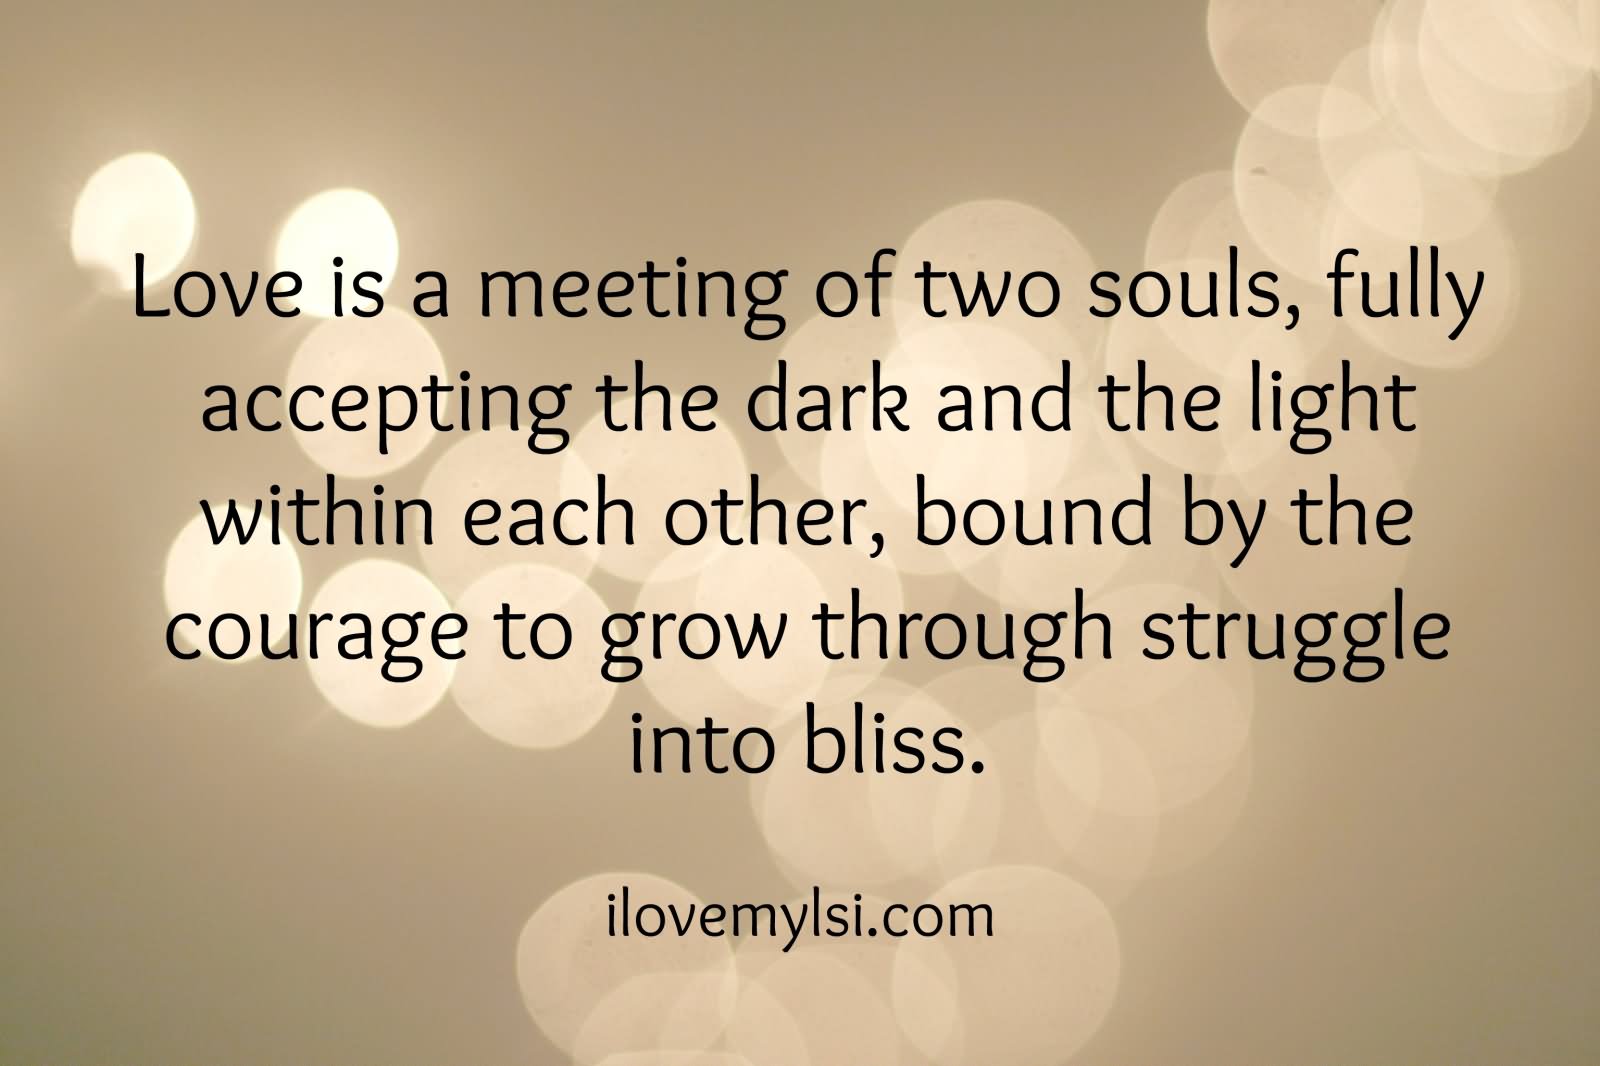 Love is a meeting of two souls fully accepting the dark and the light within each other, bound by the courage to grow through struggle into bliss.